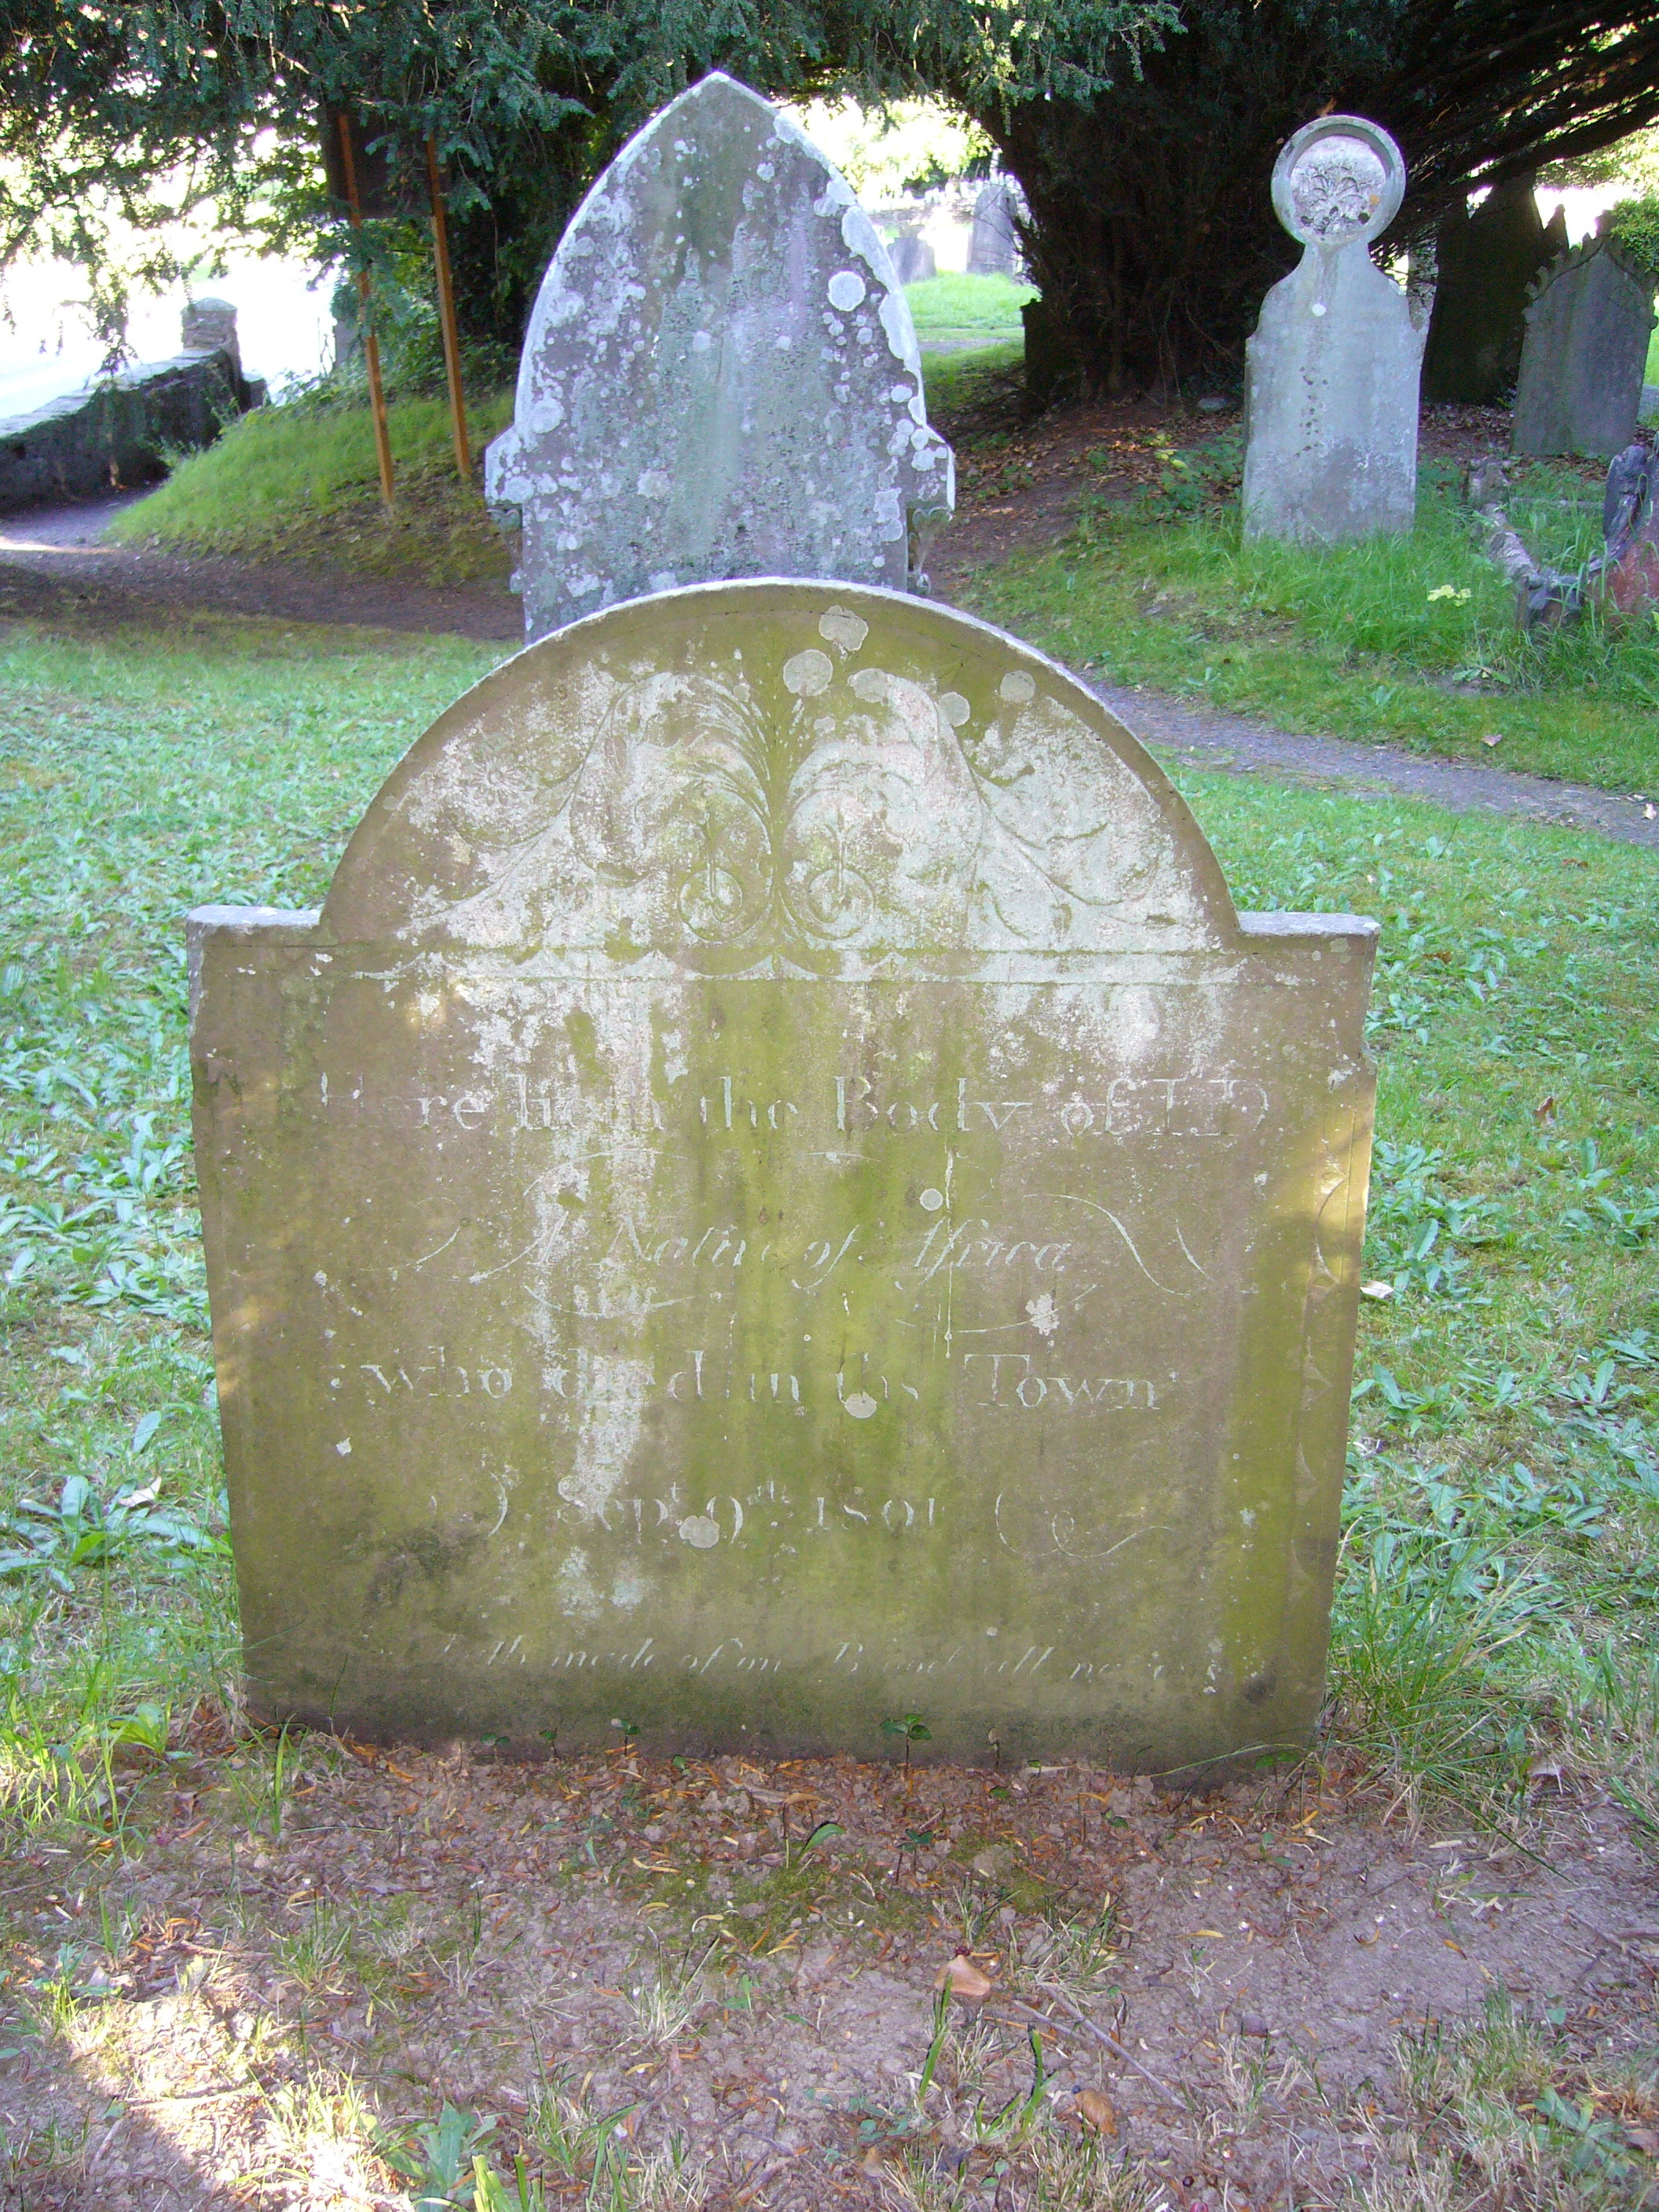 Modestly-sized headstone in a grassy churchyard; behind are other graves. An arched, shouldered, top, filled with foliate carving. The inscription is in a mixture of Roman and italic scripts; the date ‘Sept 9th 1801’ can just be made out.